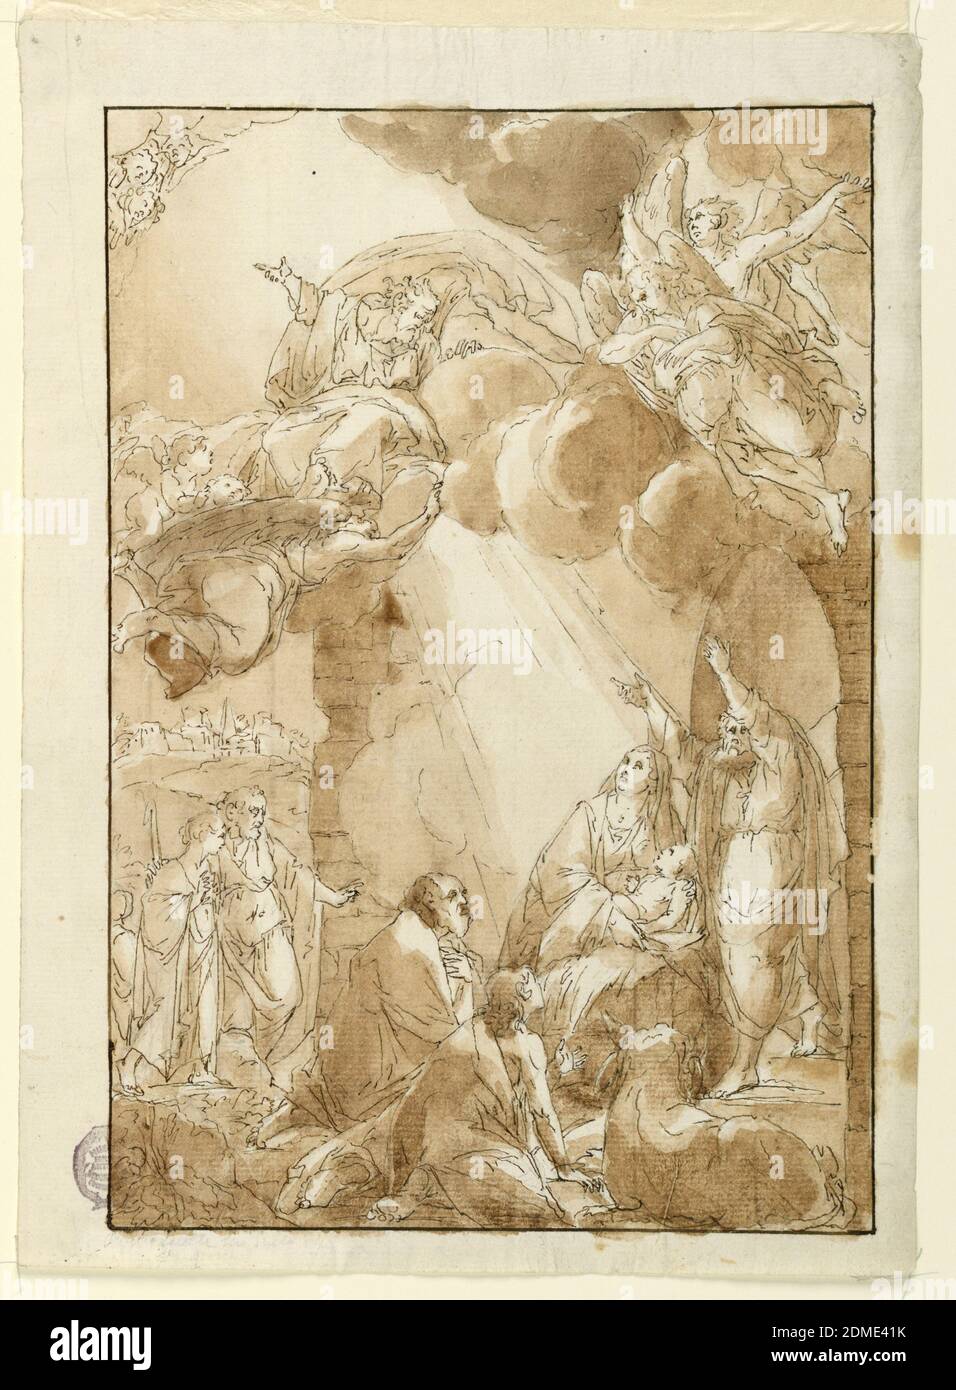 Birth of Christ, Antonio Cavallucci, Italian, 1752 - 1795, Pen and ink, brush and wash, on paper, A dramatic scene of the Birth of Jesus Christ: Mary, holding the Infant in her lap, Joseph, standing by her, two Magi kneeling before the Holy Family, two more Magi, and shepherds at the threshold are stopped in awe by a bright beam of light announcing the arrival of God the Father, seated in clouds and preceded by angels, to bless his Son. Christ's family is in a rustic shelter not far from Bethlehem, the city upon a hill in the background., Italy, 18th century, figures, Drawing Stock Photo